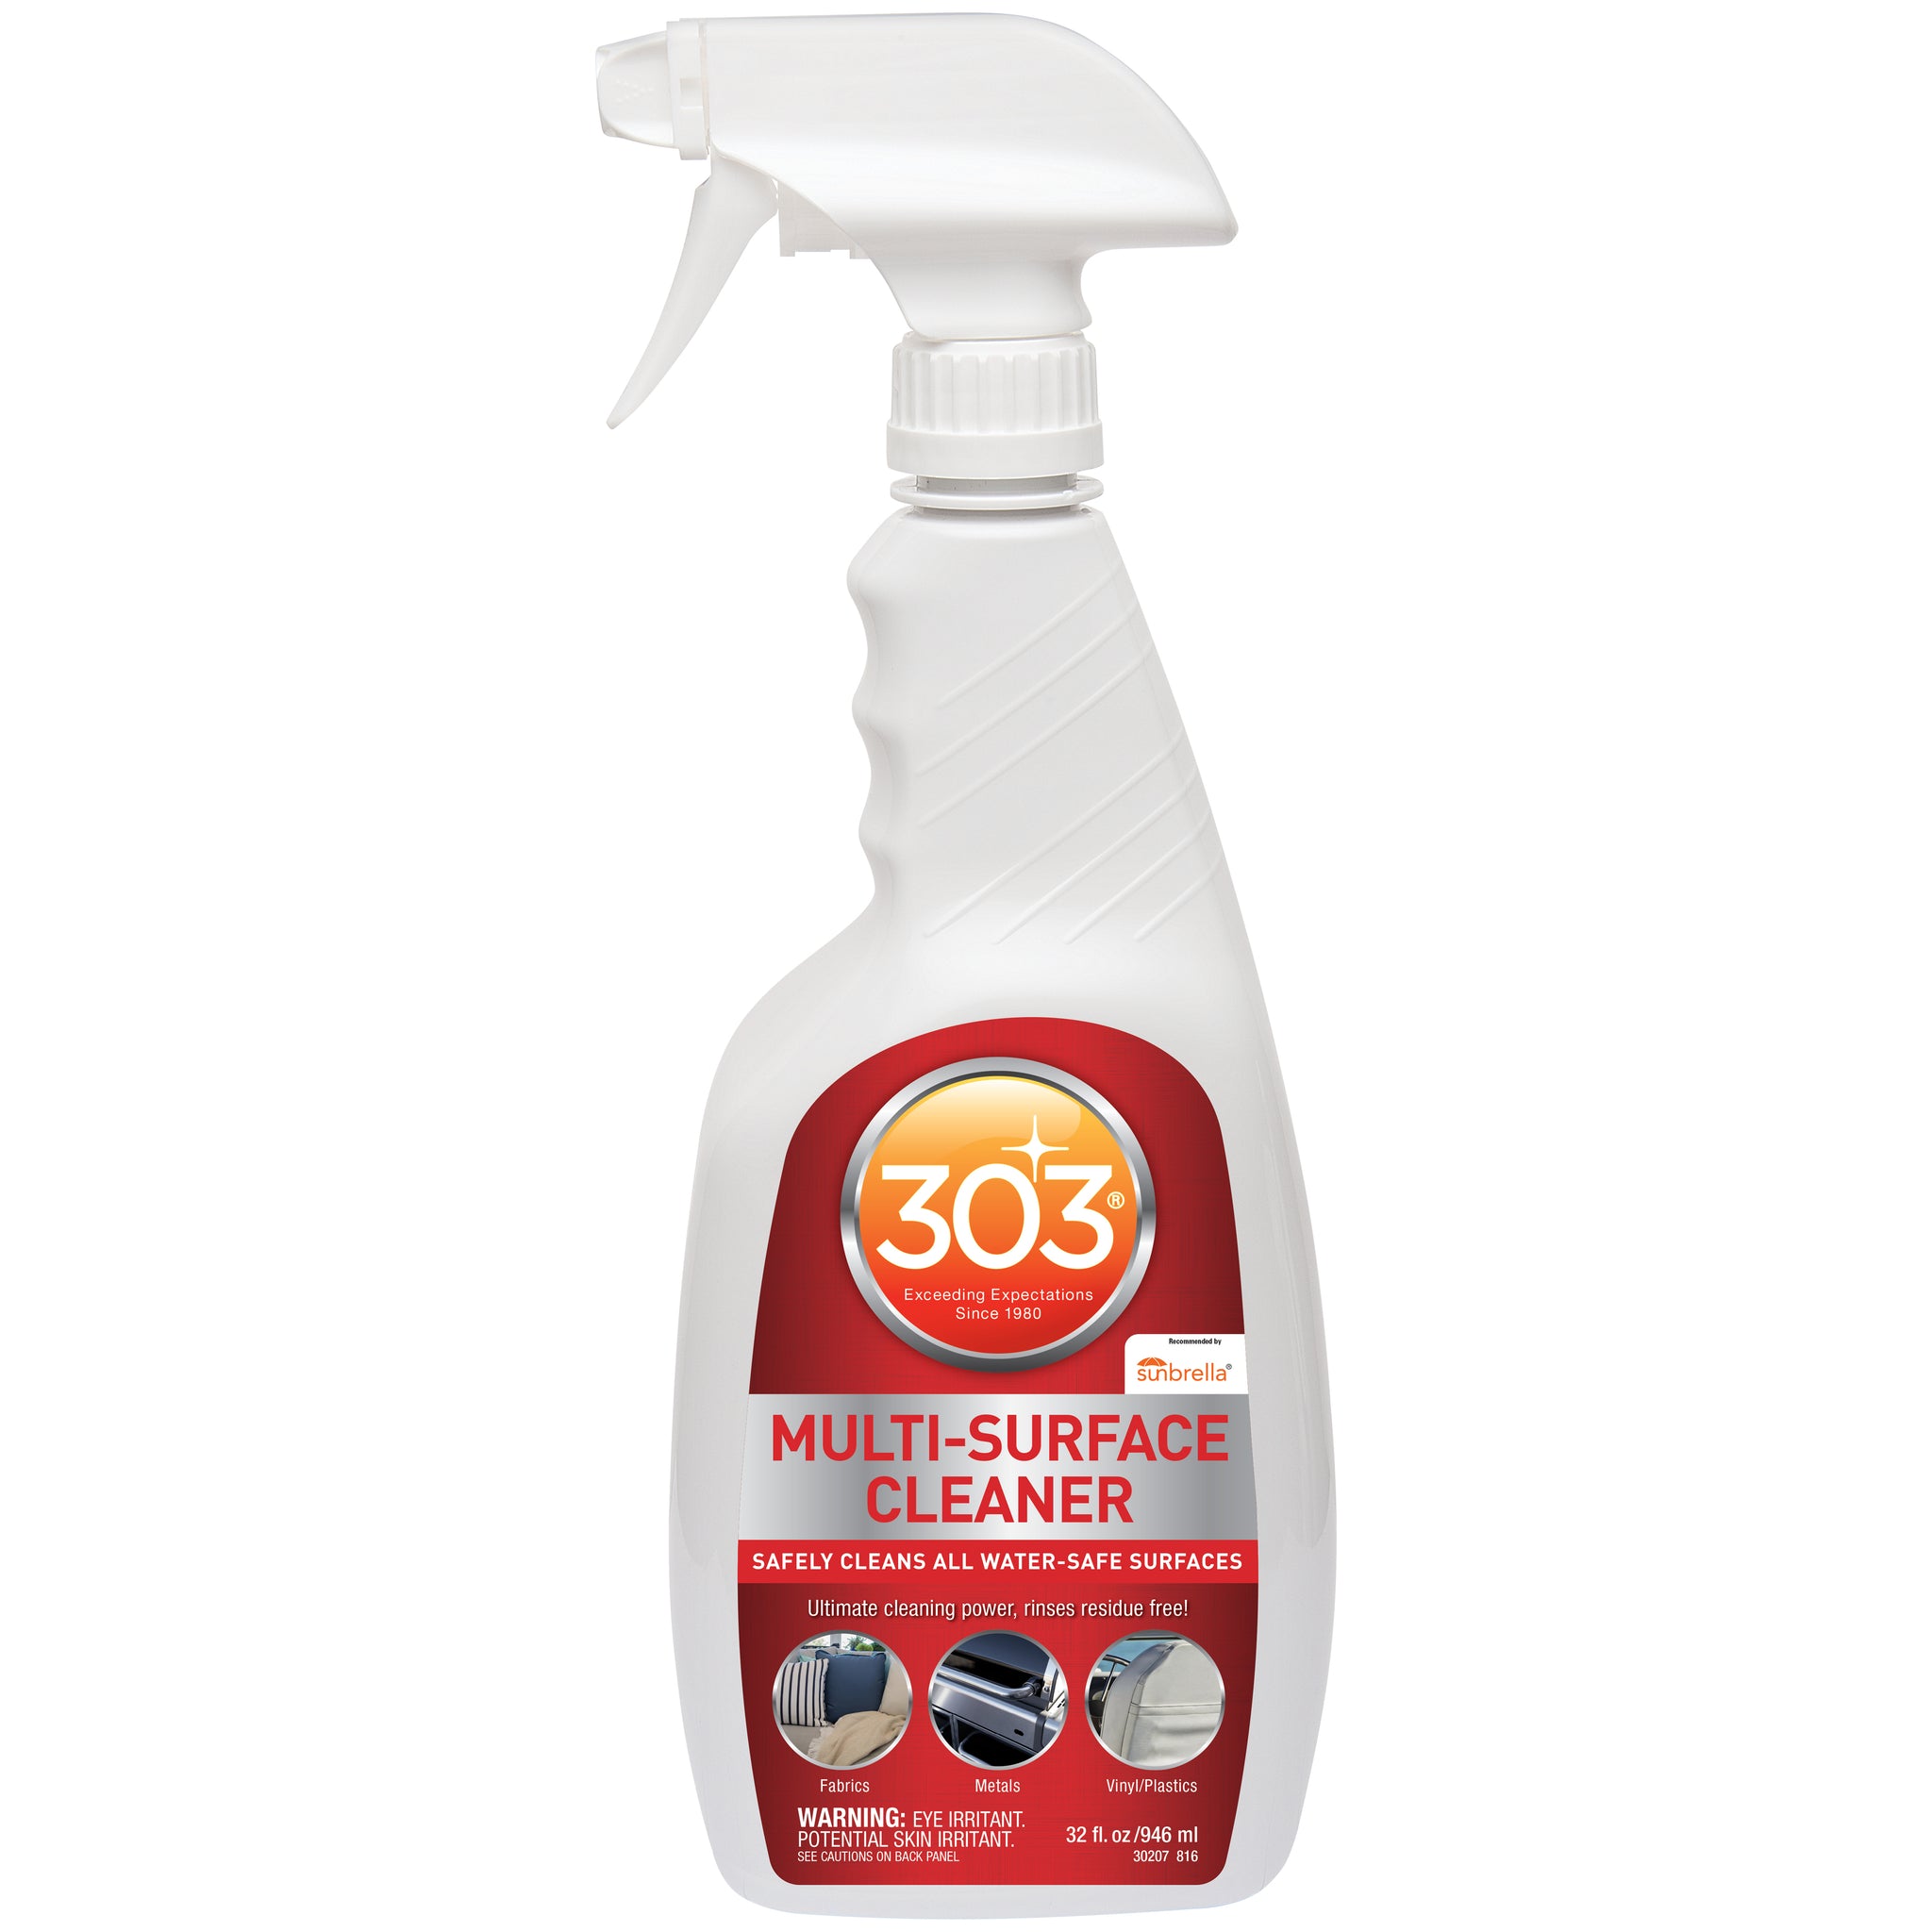 MULTI-SURFACE CLEANER32OZ